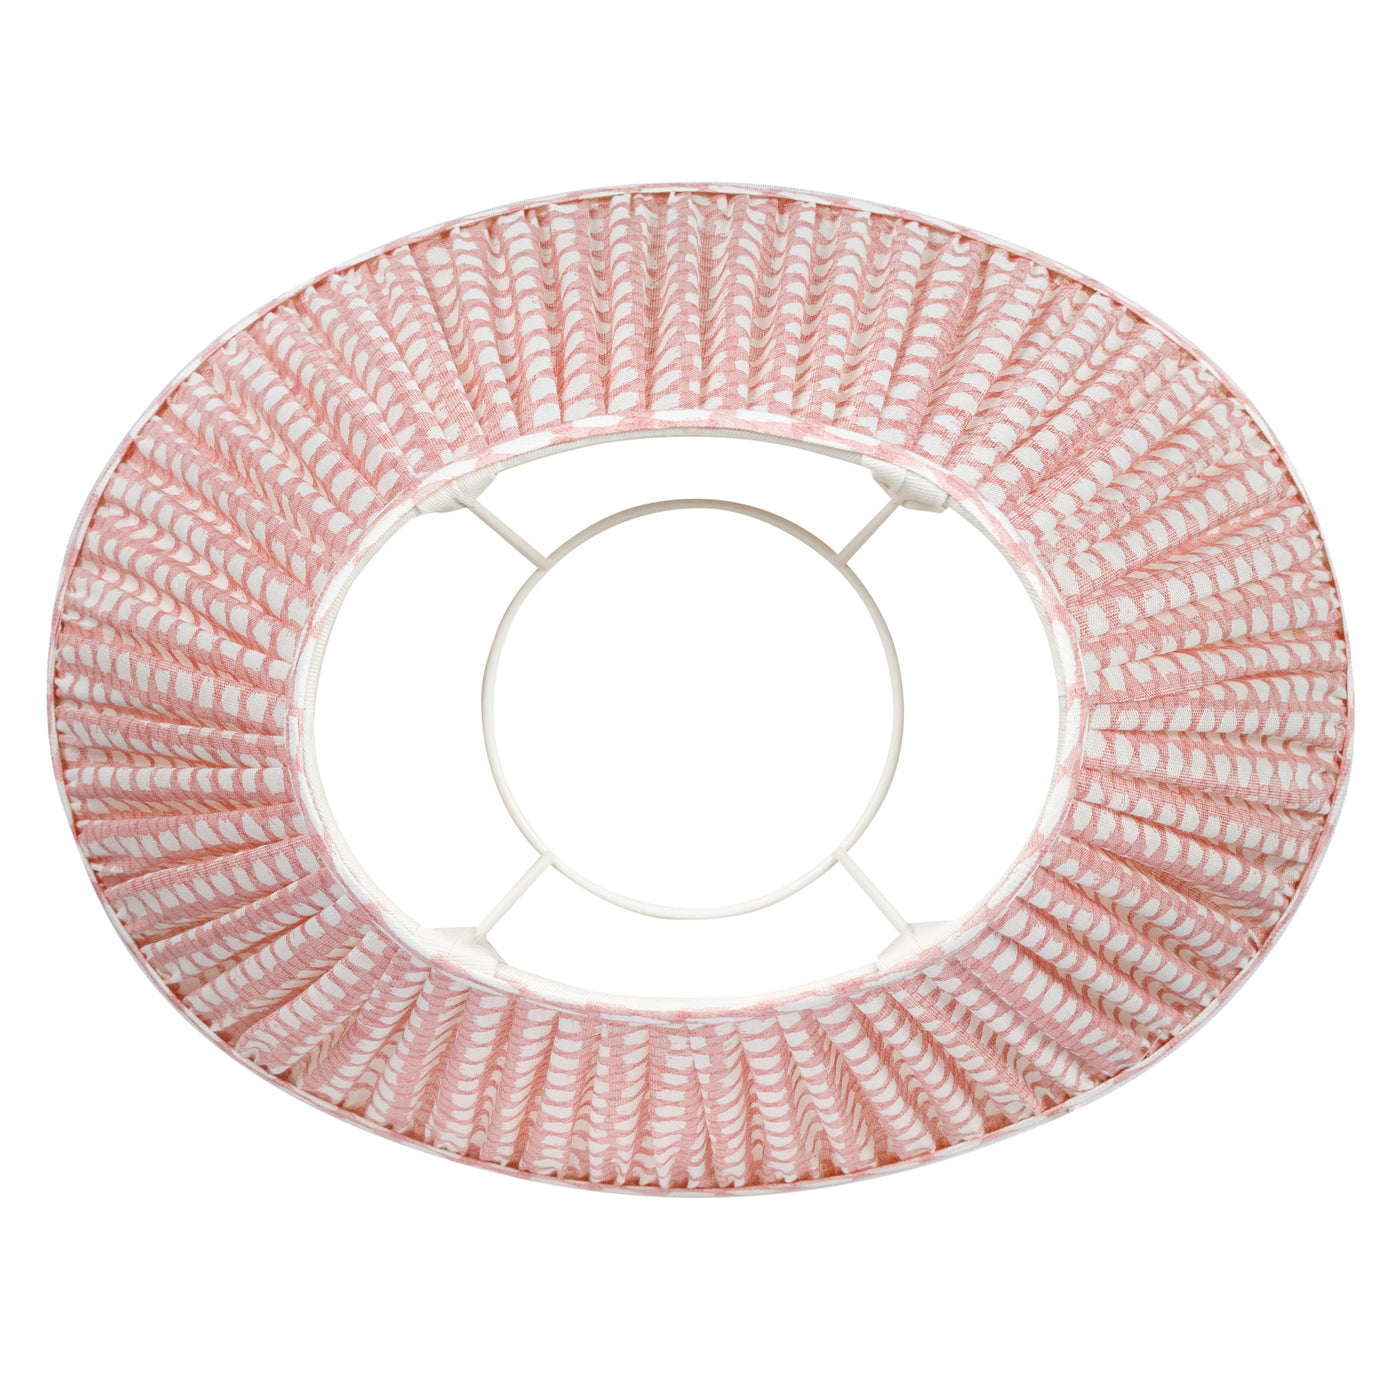 Oval Fermoie Lampshade - Wicker in Pink | Newport Lamp And Shade | Located in Newport, RI